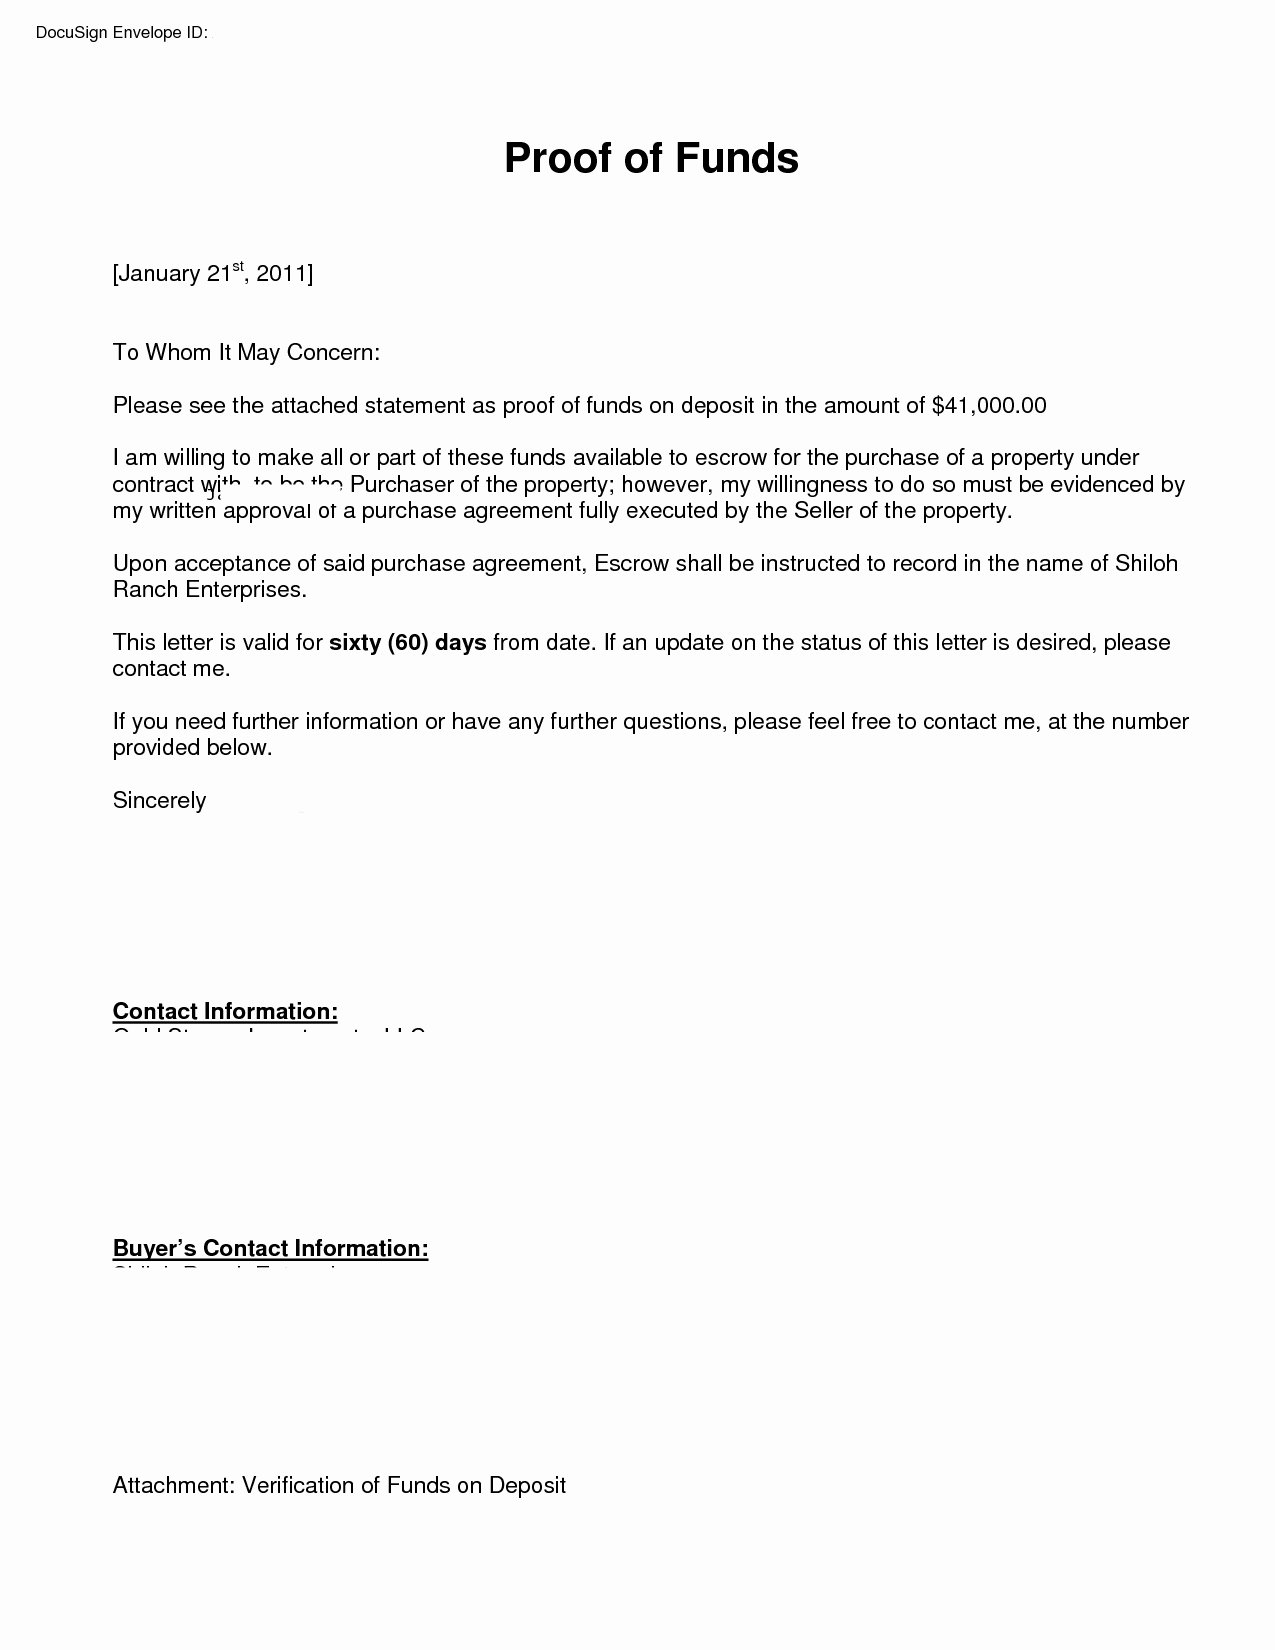 Sample Proof Of Funds Letter Template New Proof Funds Letter